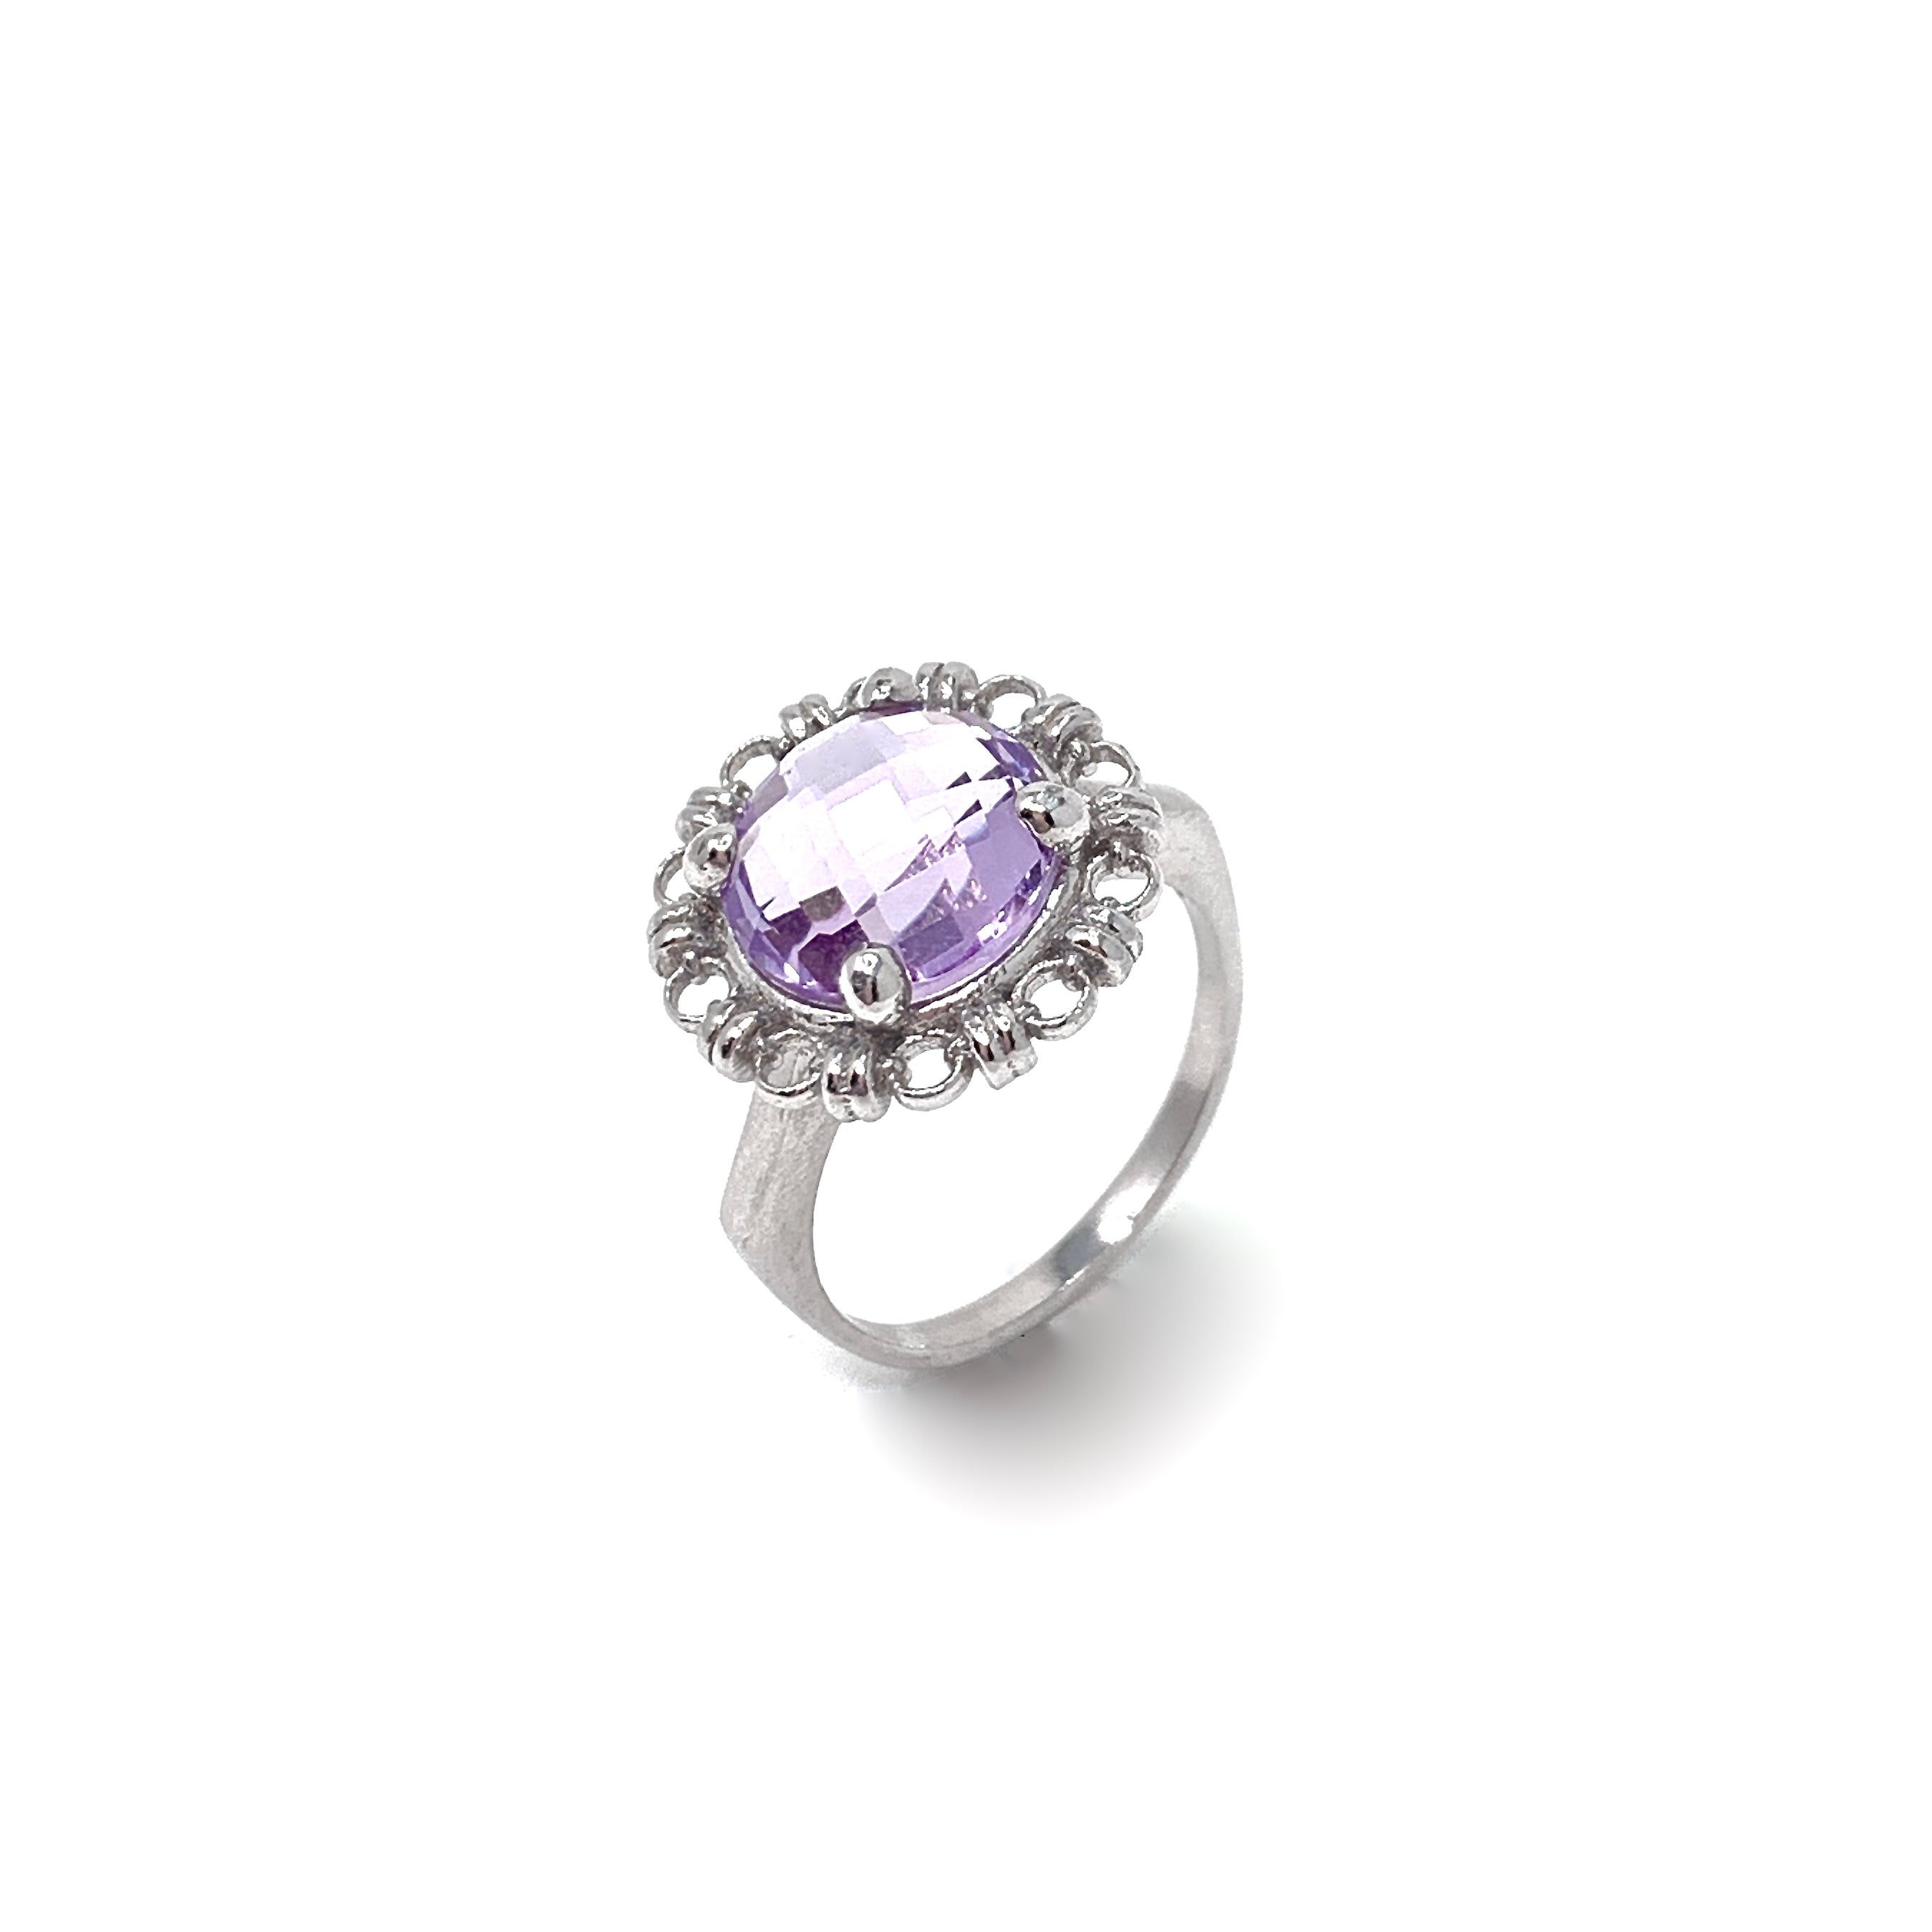 Filary Ring in Silver with Amethyst